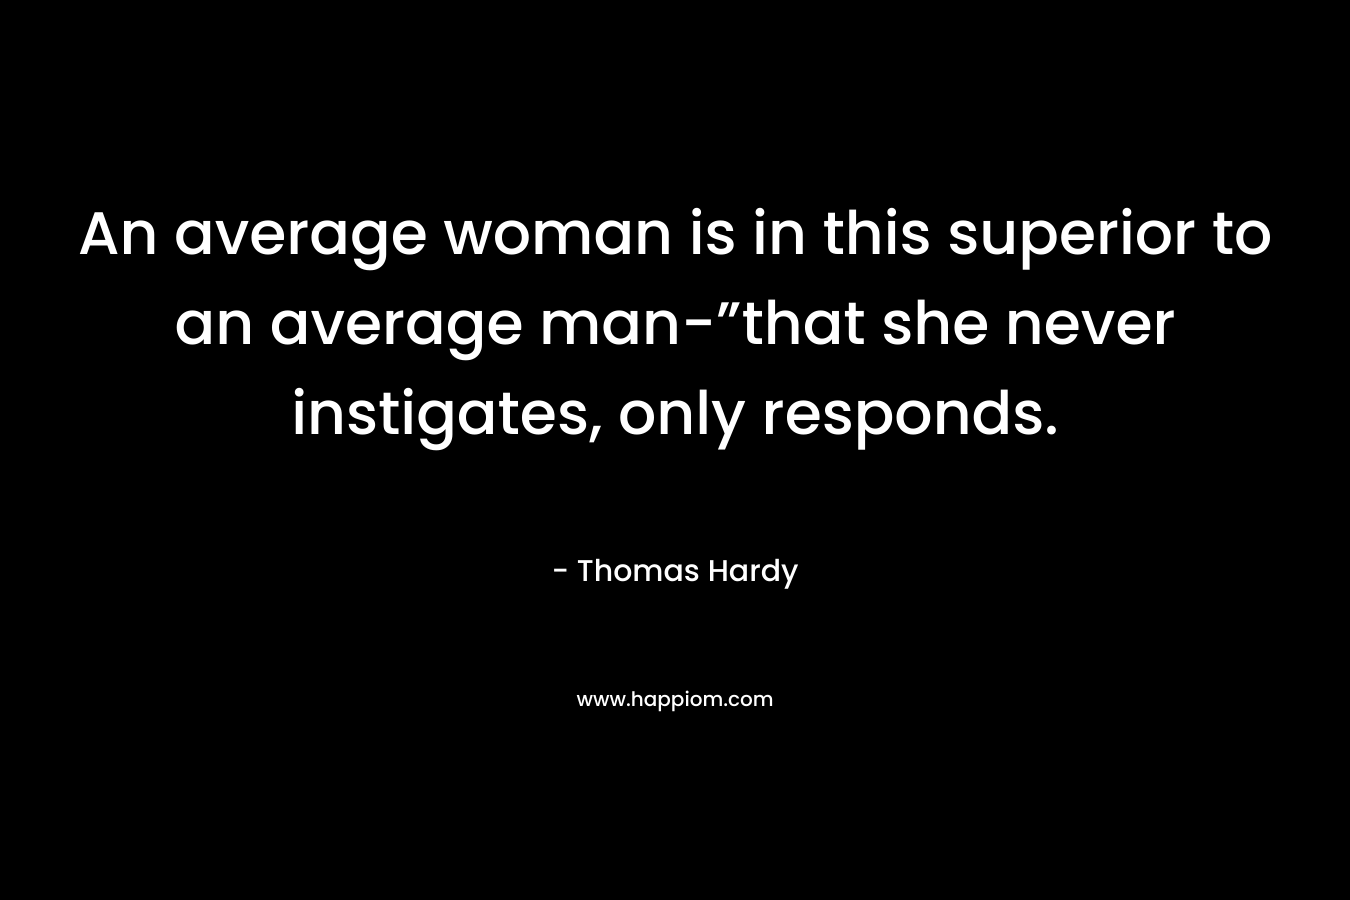 An average woman is in this superior to an average man-”that she never instigates, only responds.